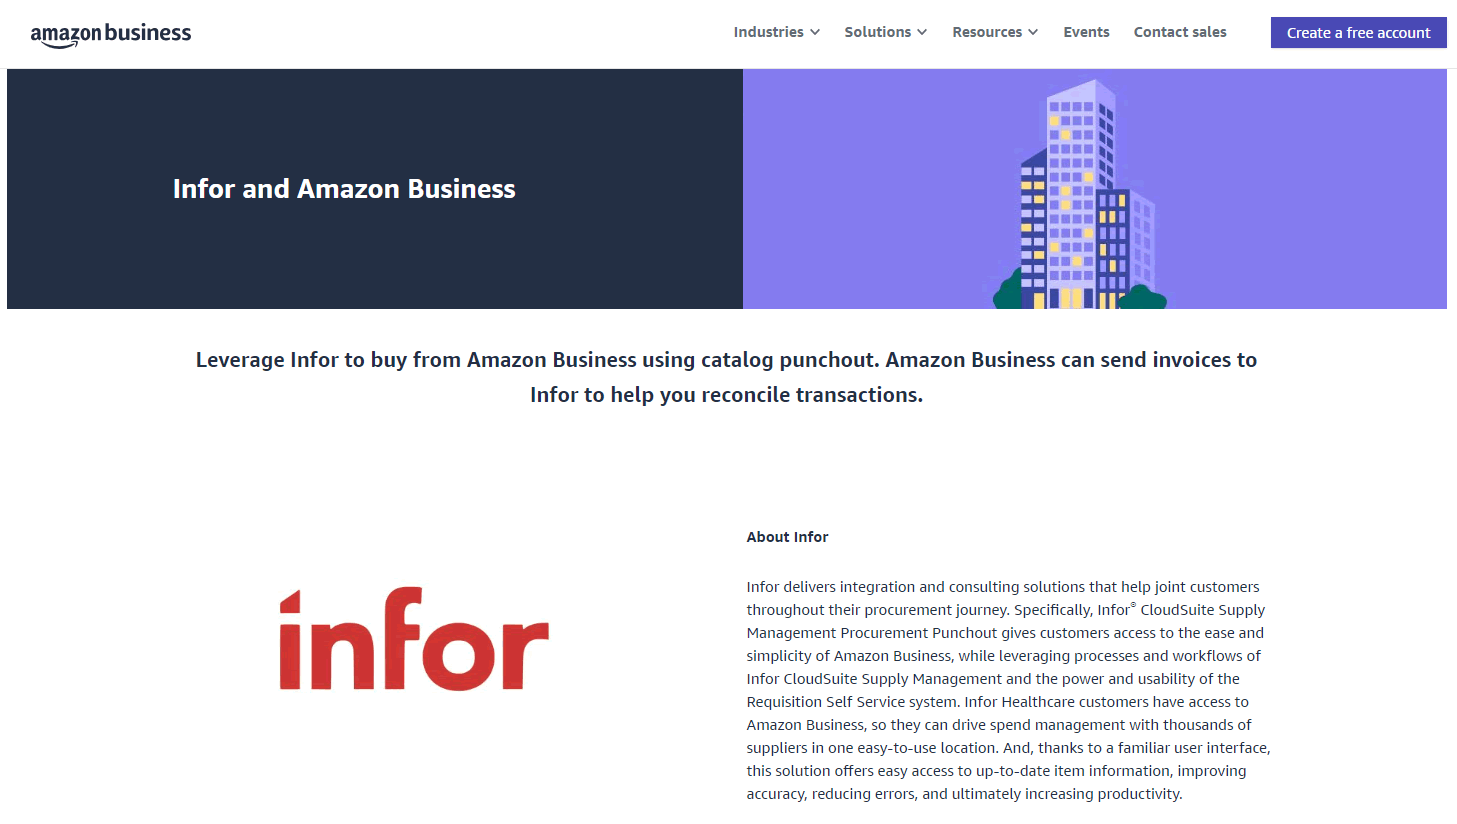 infor partnership with amazon business